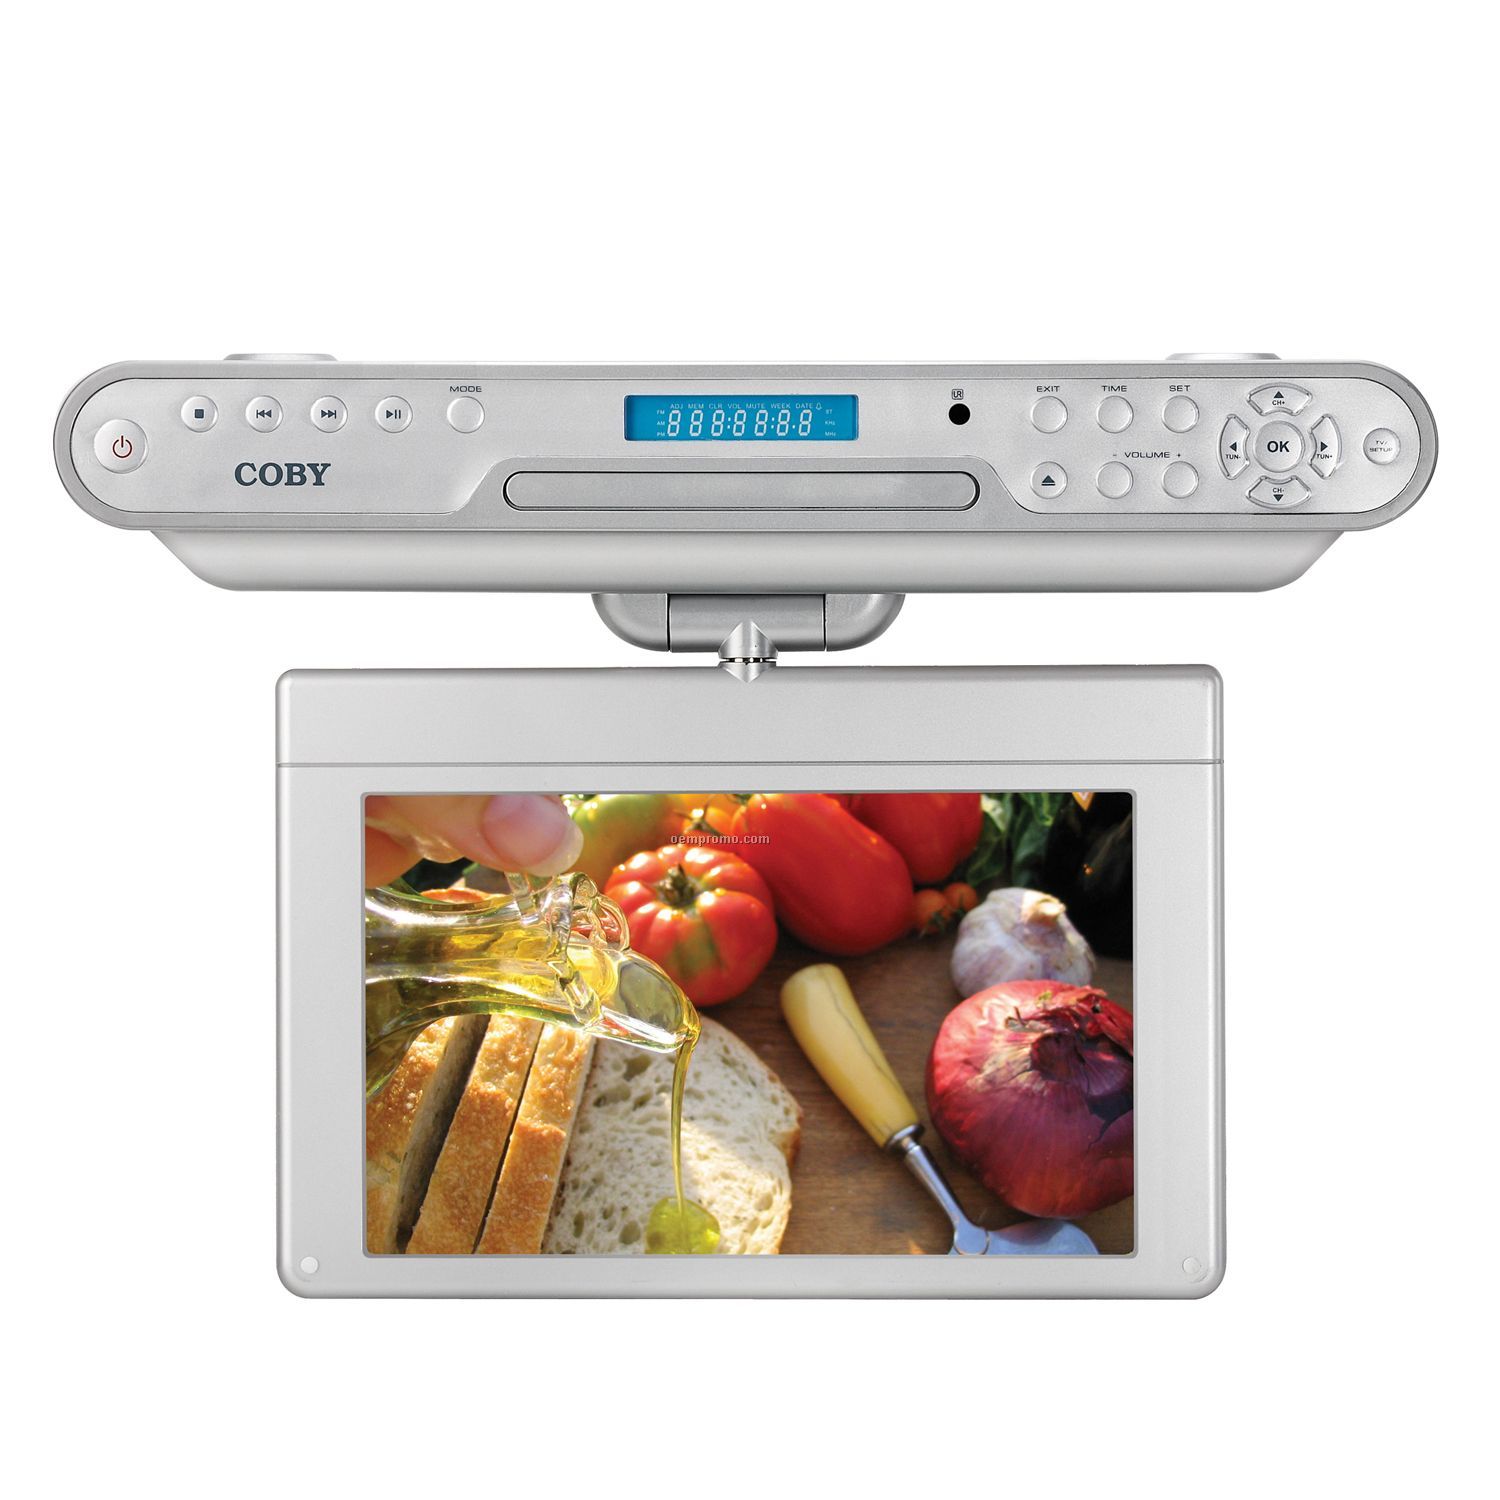 Coby 10" Under-counter DVD Player